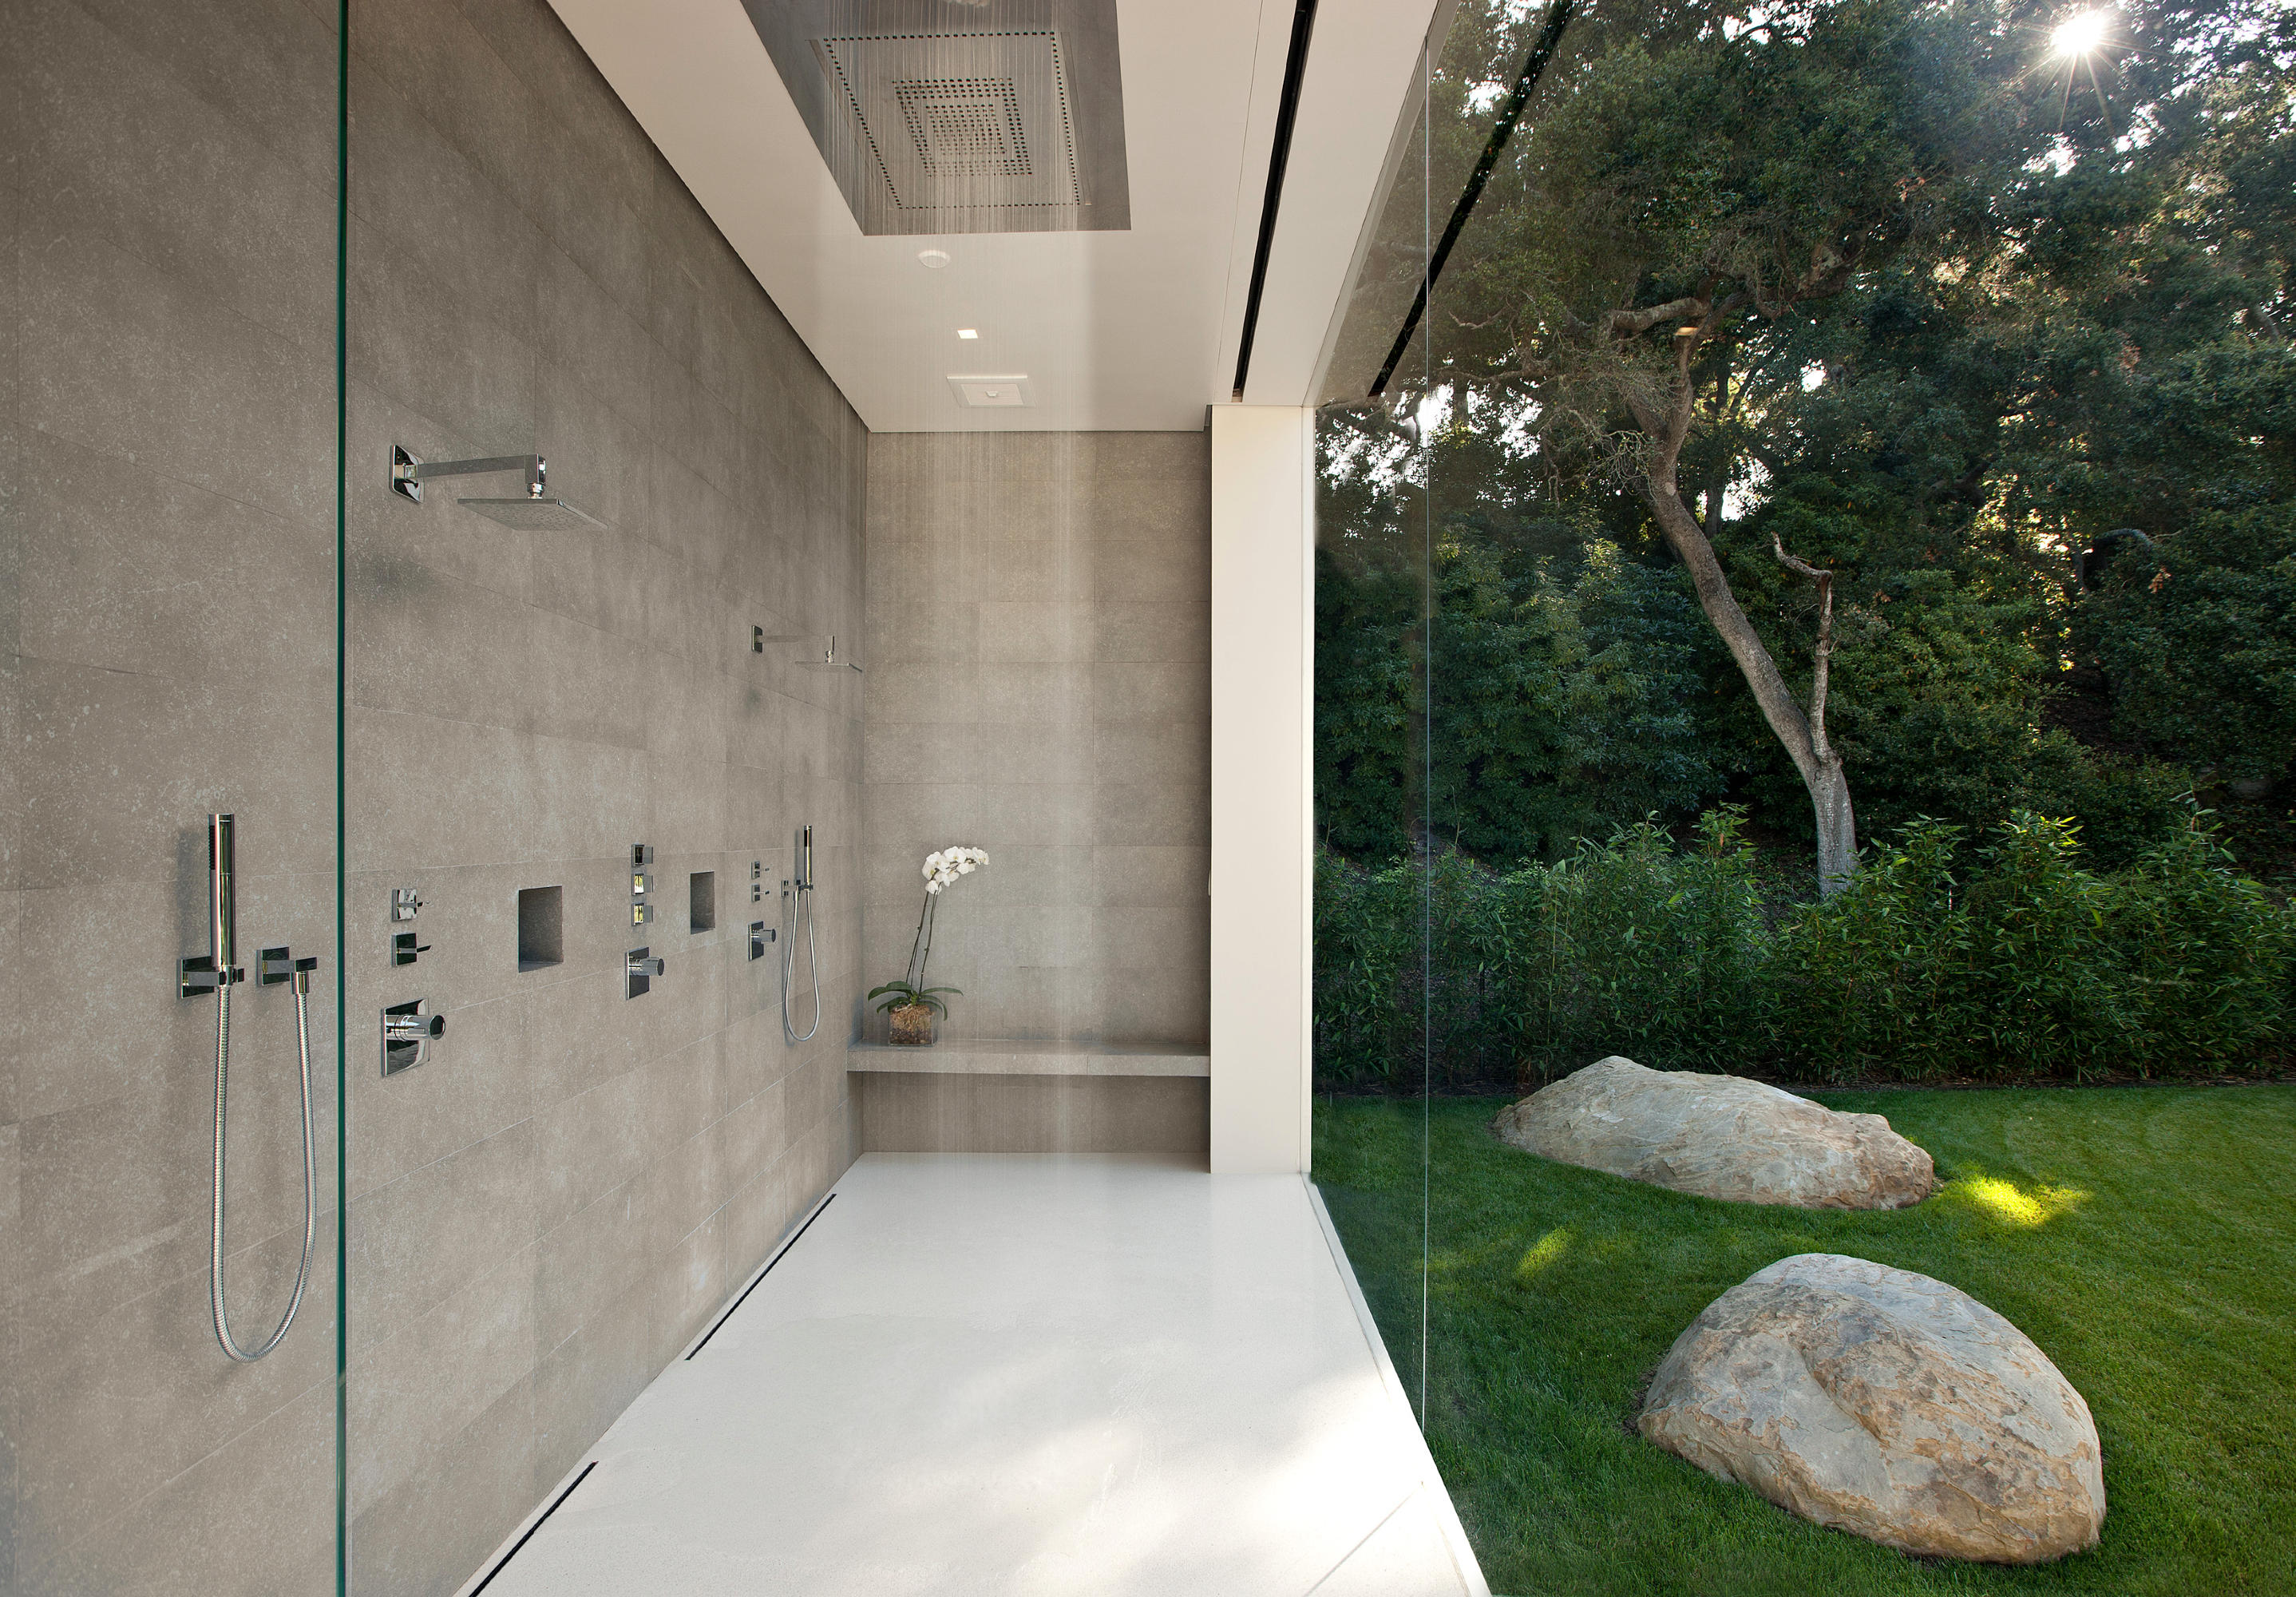 Shower and glass wall in the most minimalist house